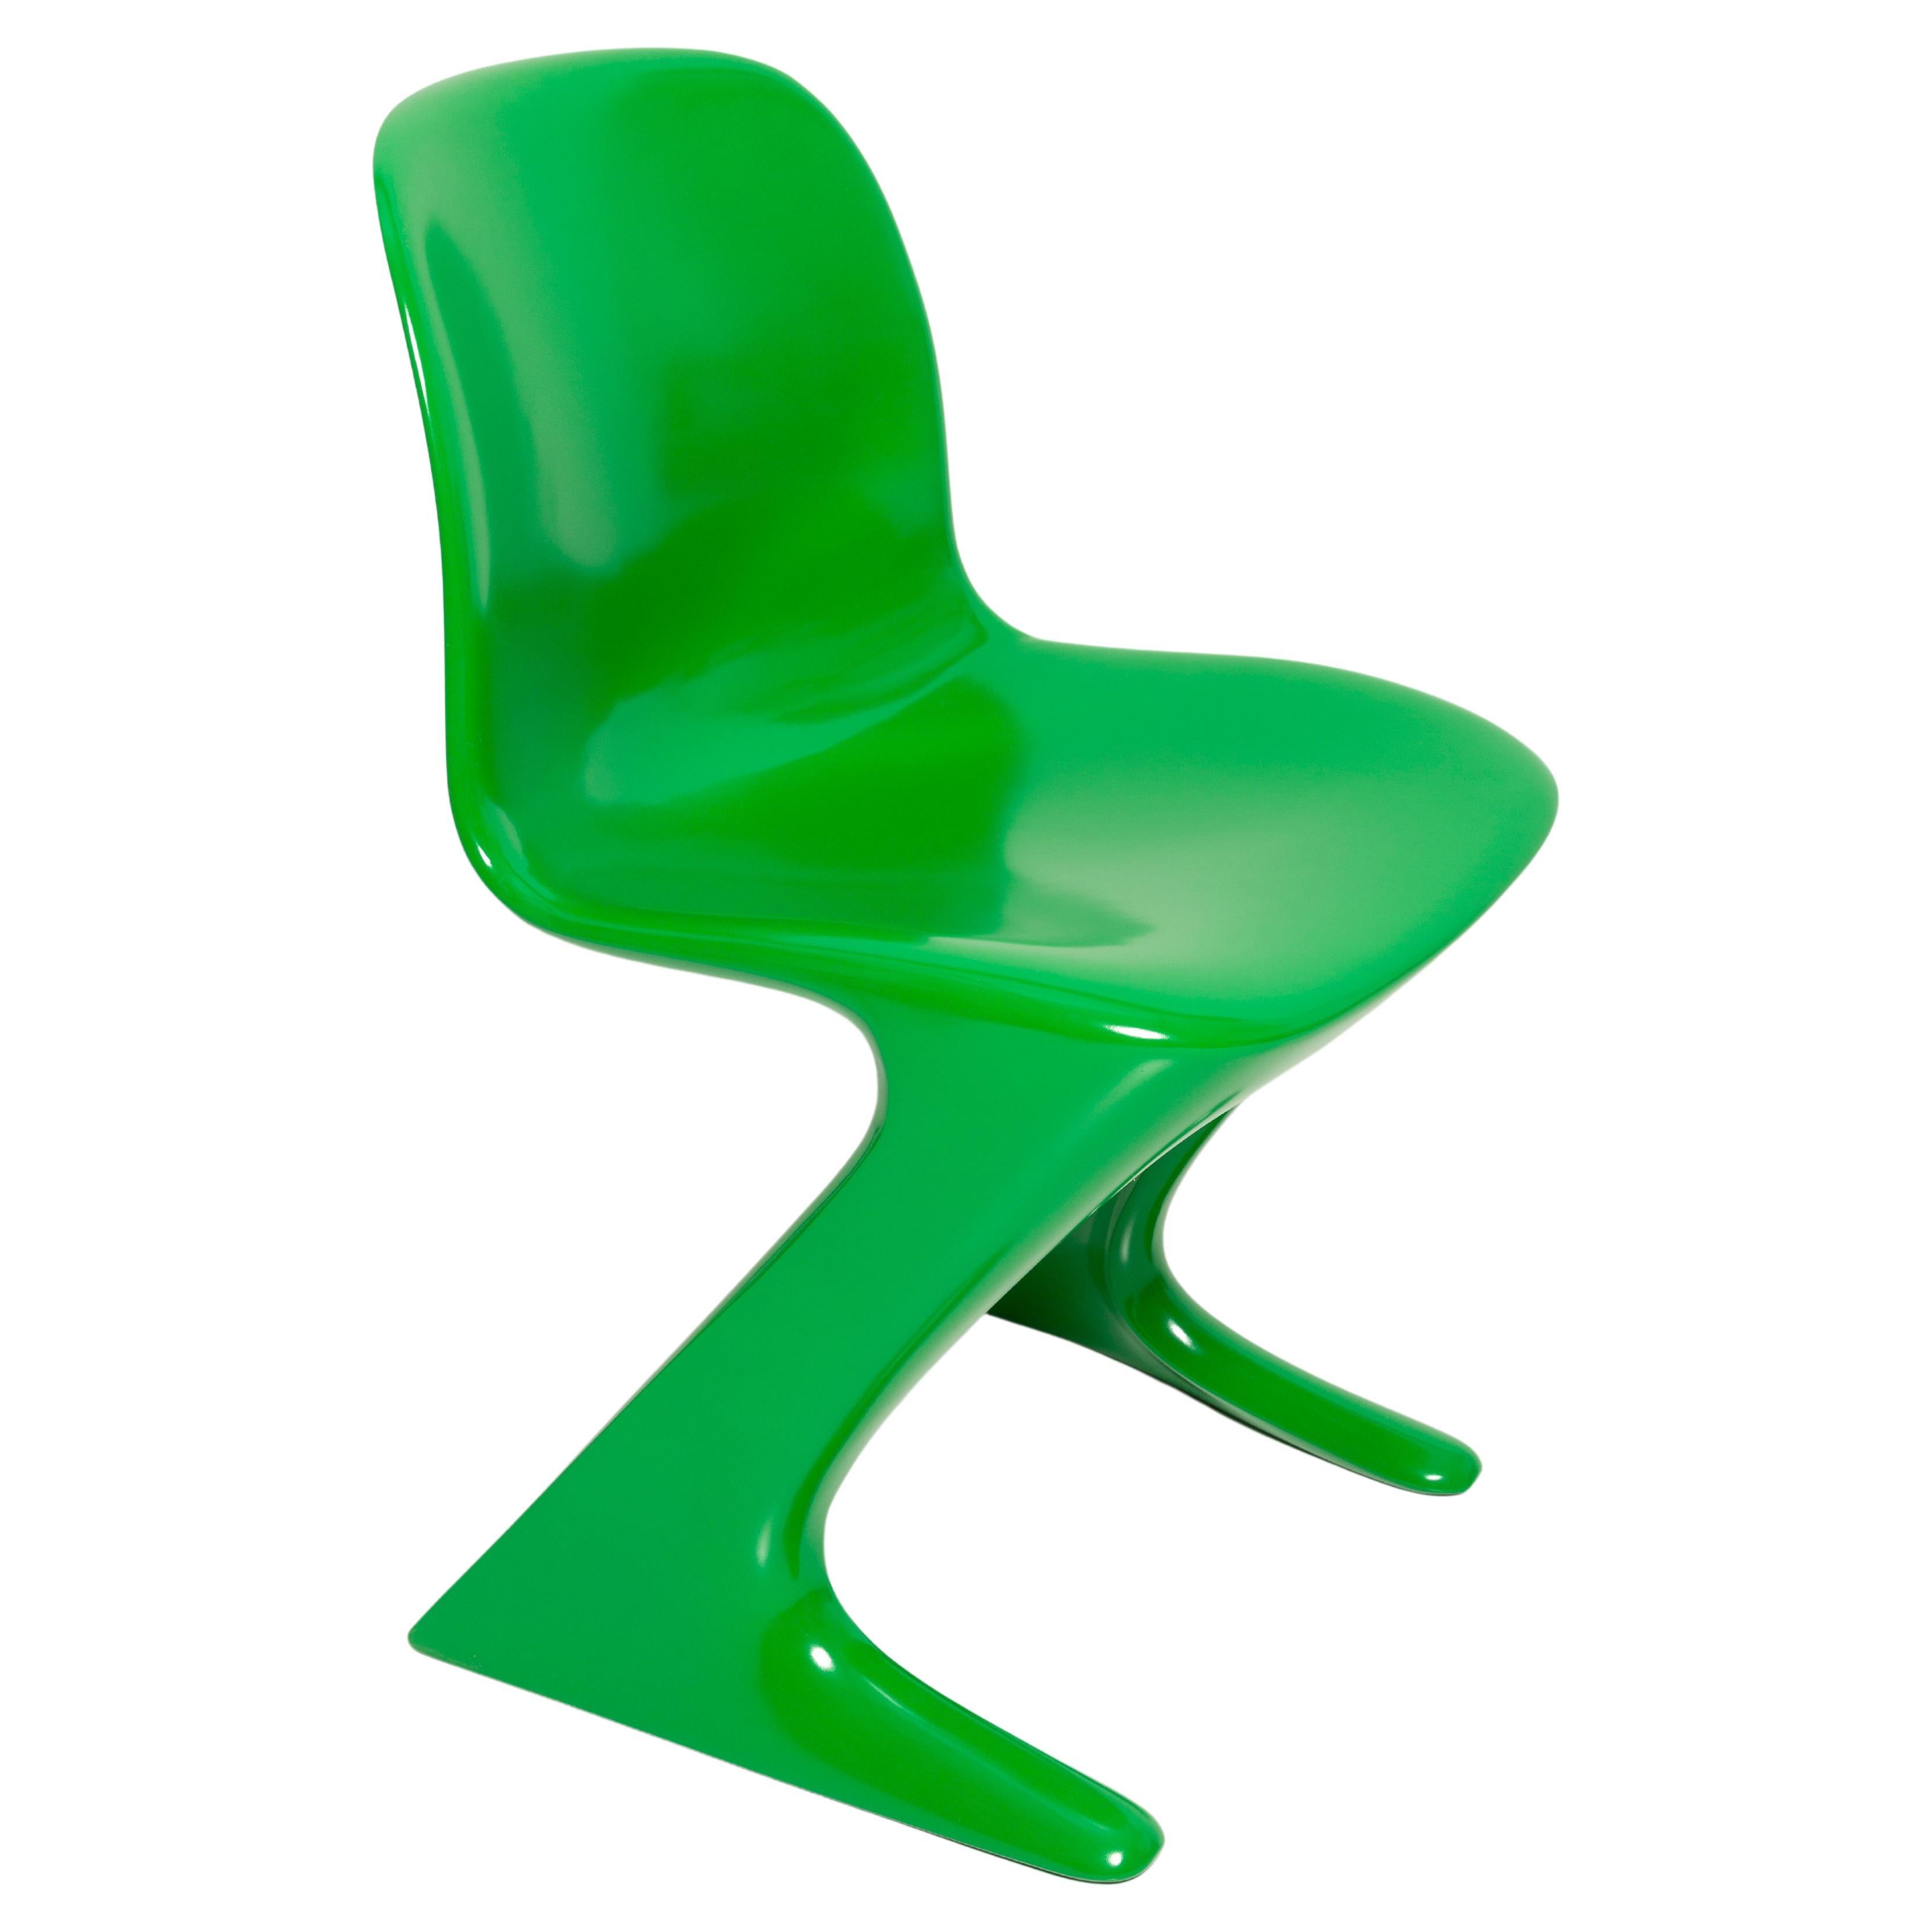 Green Kangaroo Chair Designed by Ernst Moeckl, Germany, 1960s